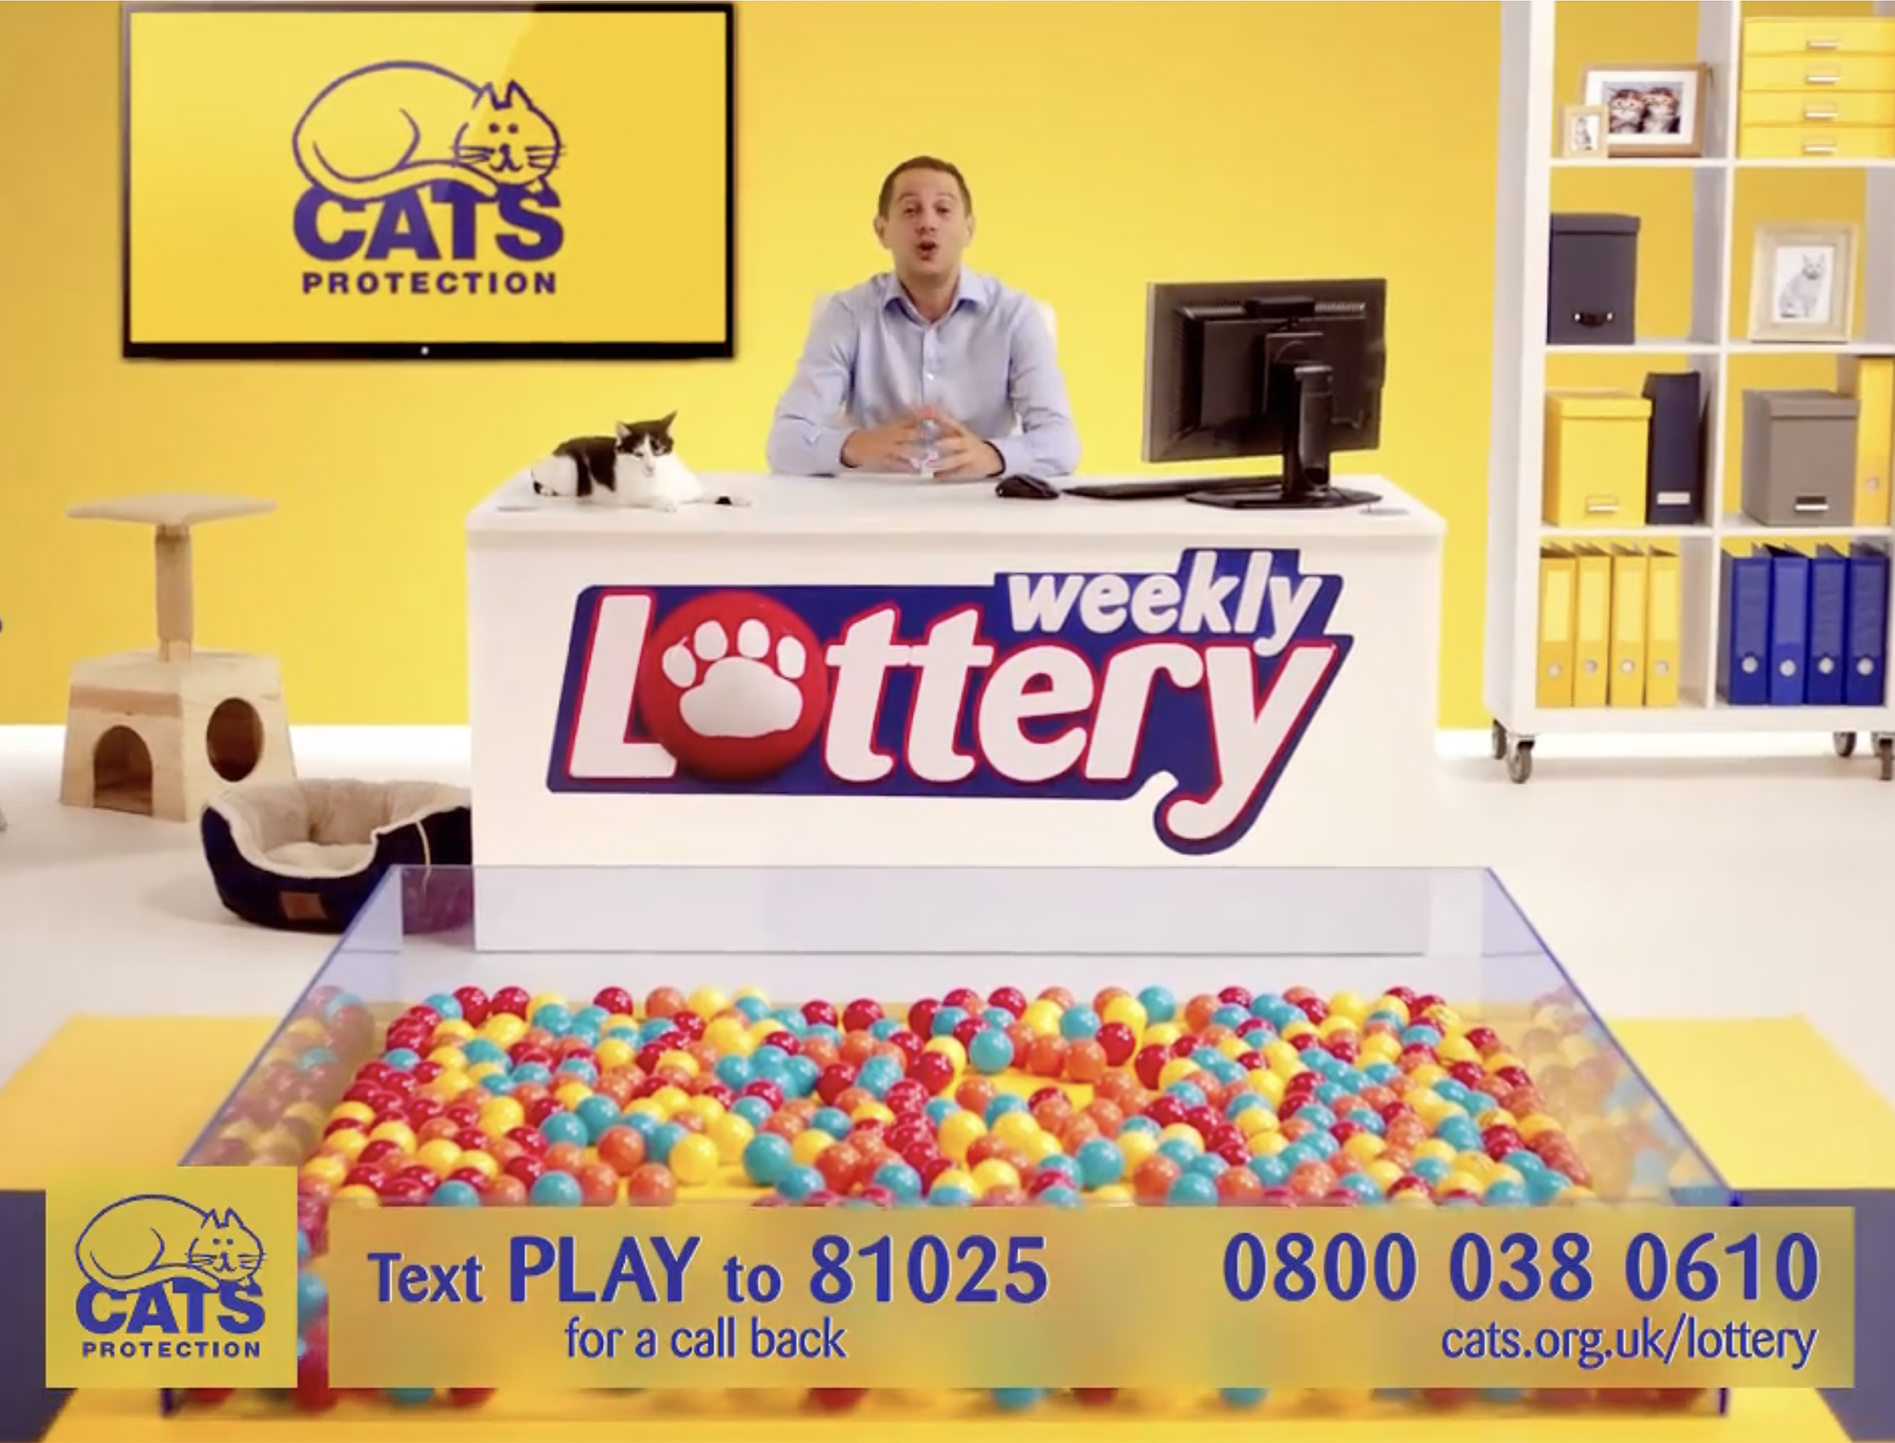 Cats Lottery draw